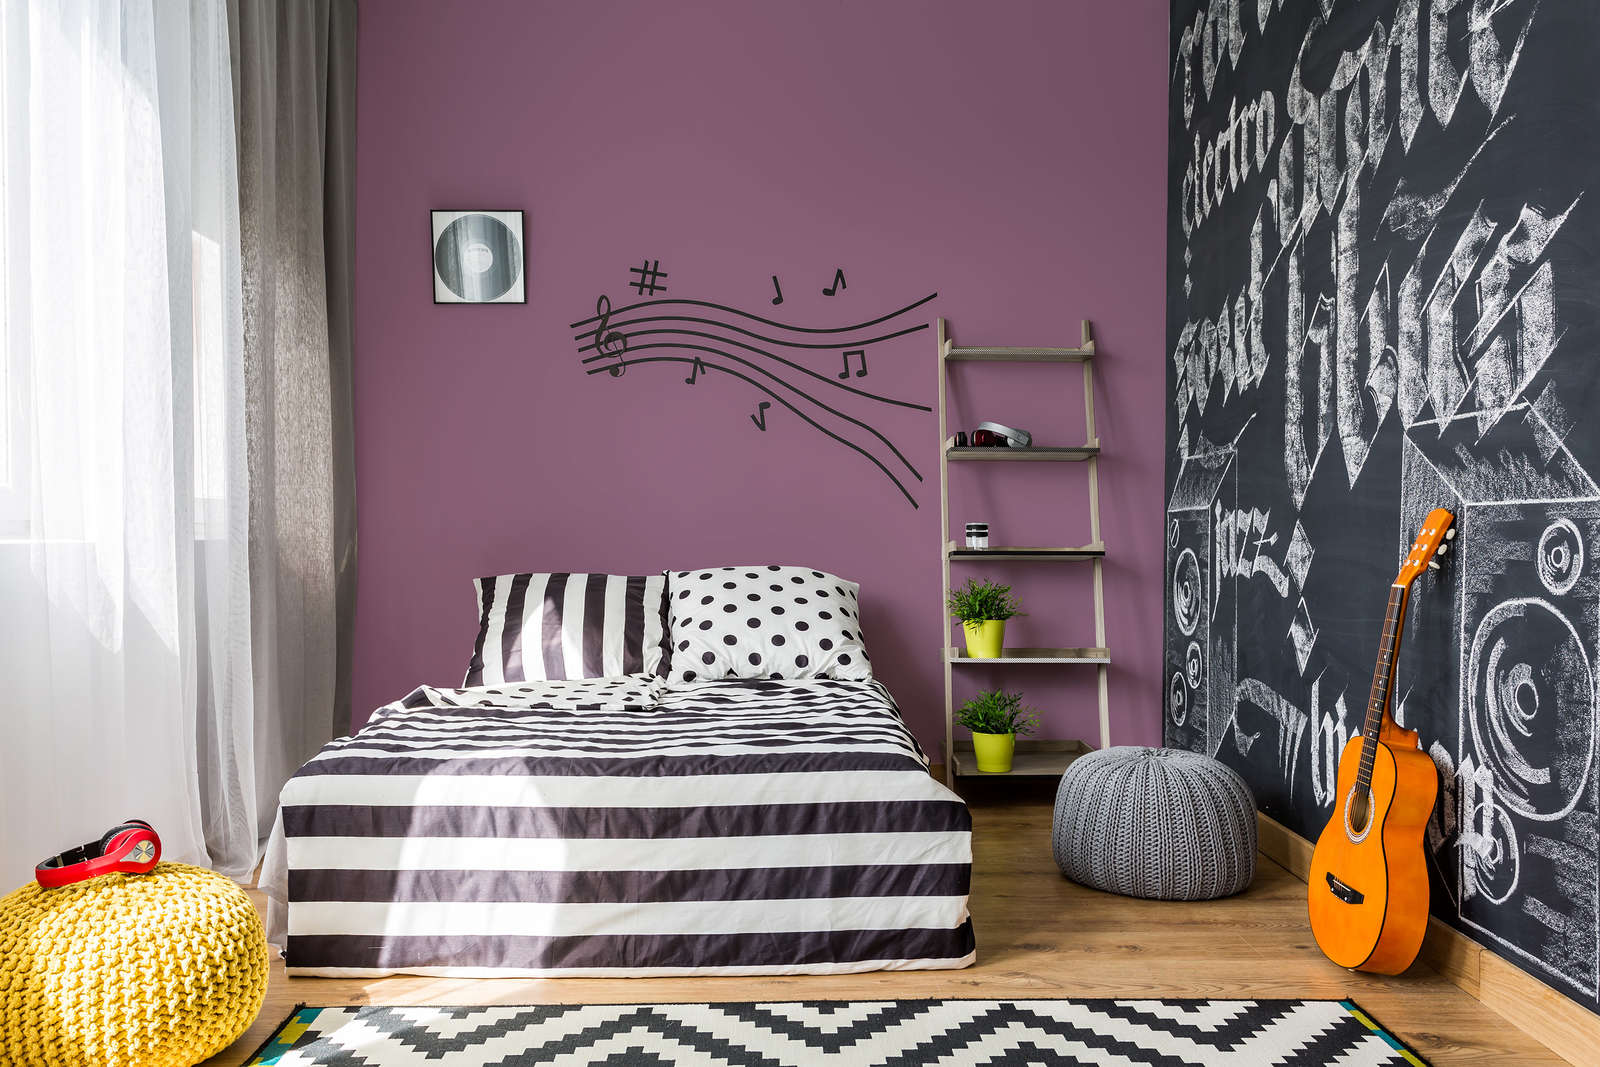             Premium Wall Paint cheerful berry »Beautiful Berry« NW211 – 5 litre
        